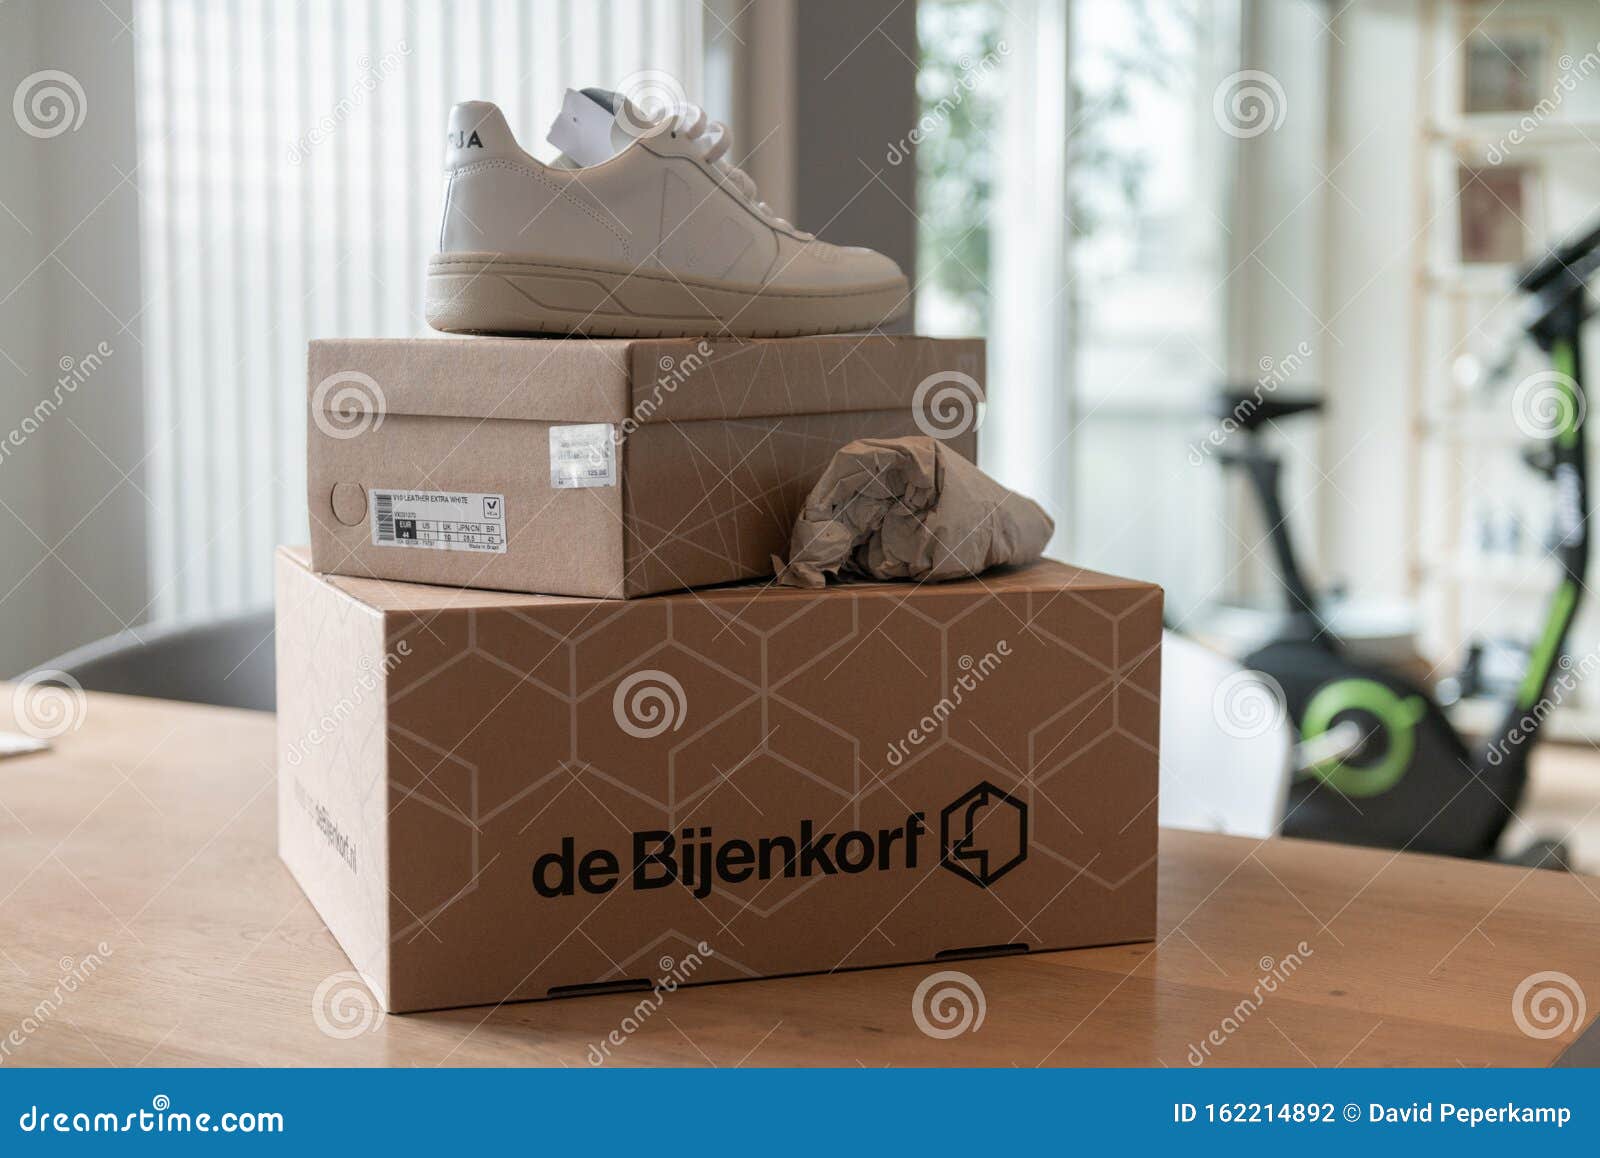 De Bijenkorf Online Package Delivery, Unboxing Package, Online Shopping, Fashion Shoes, White Sneakers, Box on the Table Editorial Photography - of fashion, delivery: